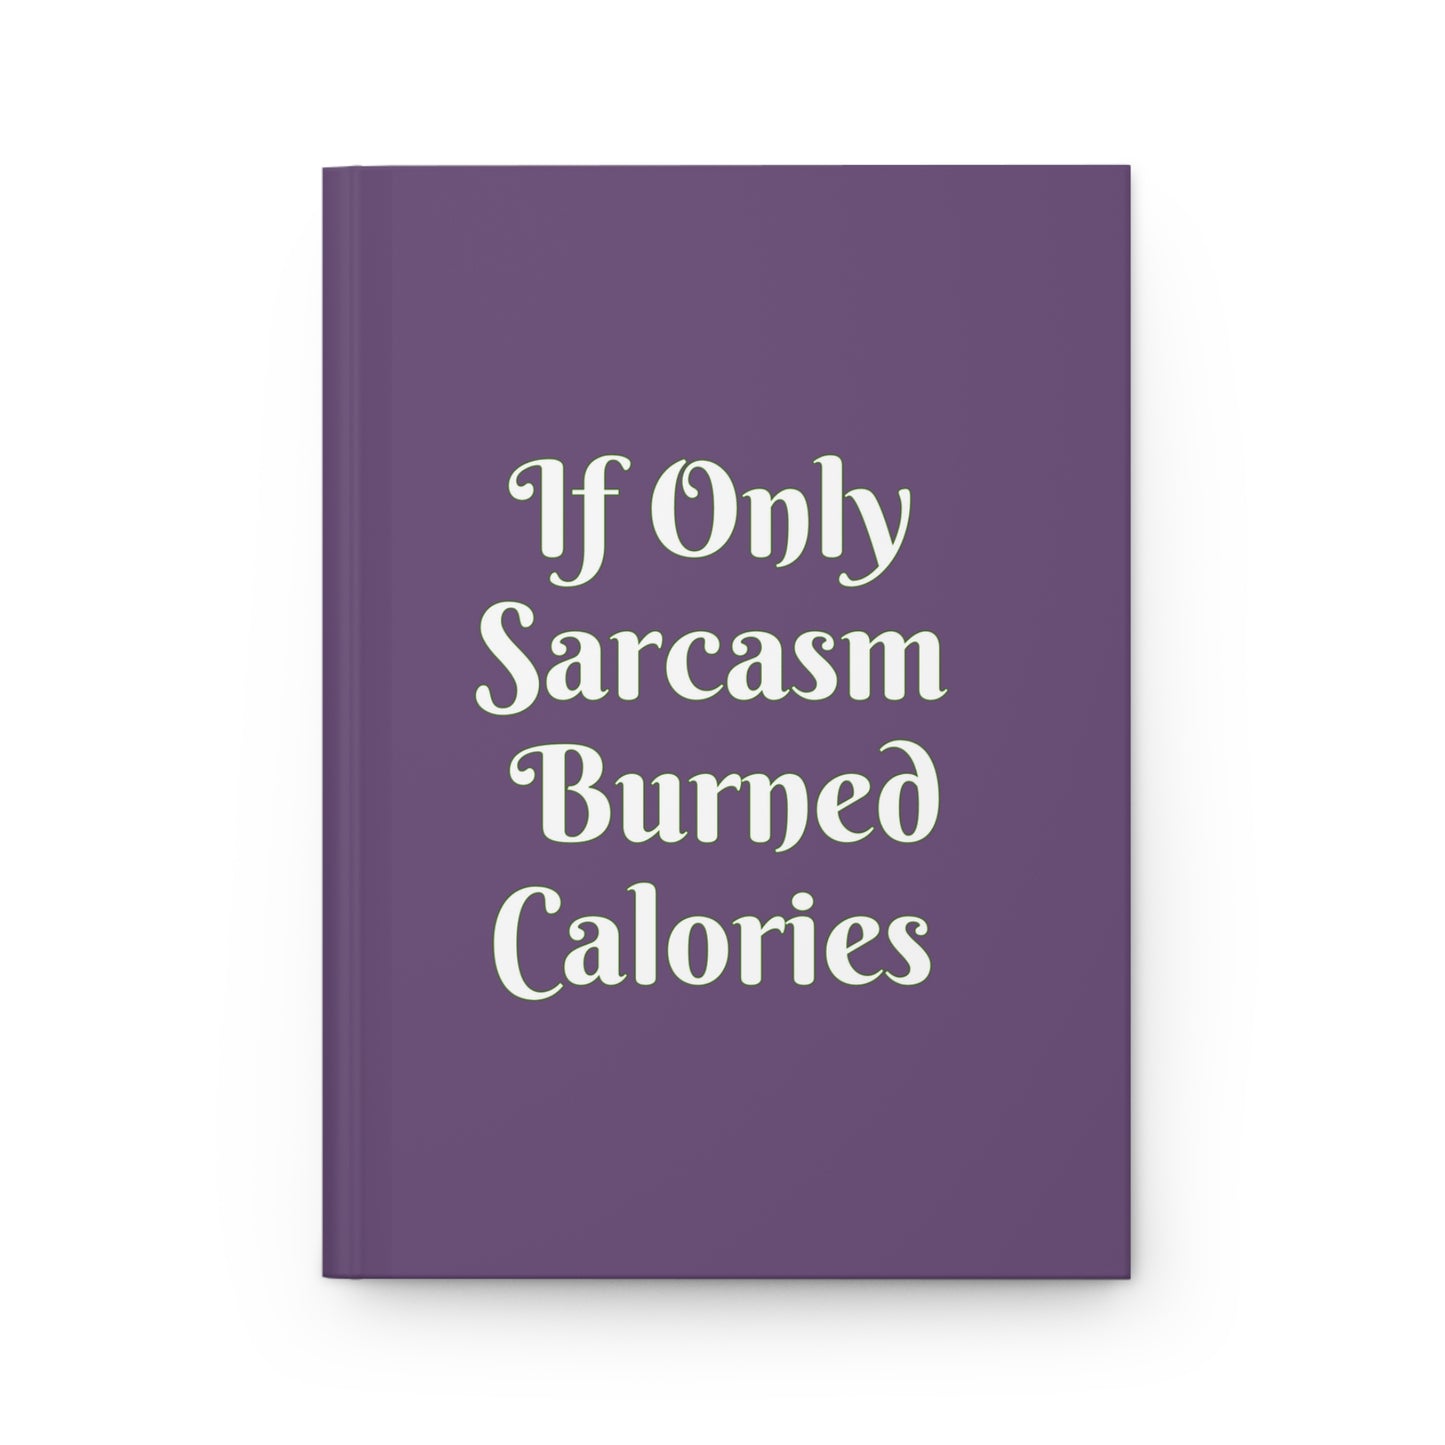 Sarcasm Burned Calories Journal: Hardcover Notebook for Daily Reflections, 5.75"x7.5", Mindfulness and Wellness, Self Care, Gift Idea